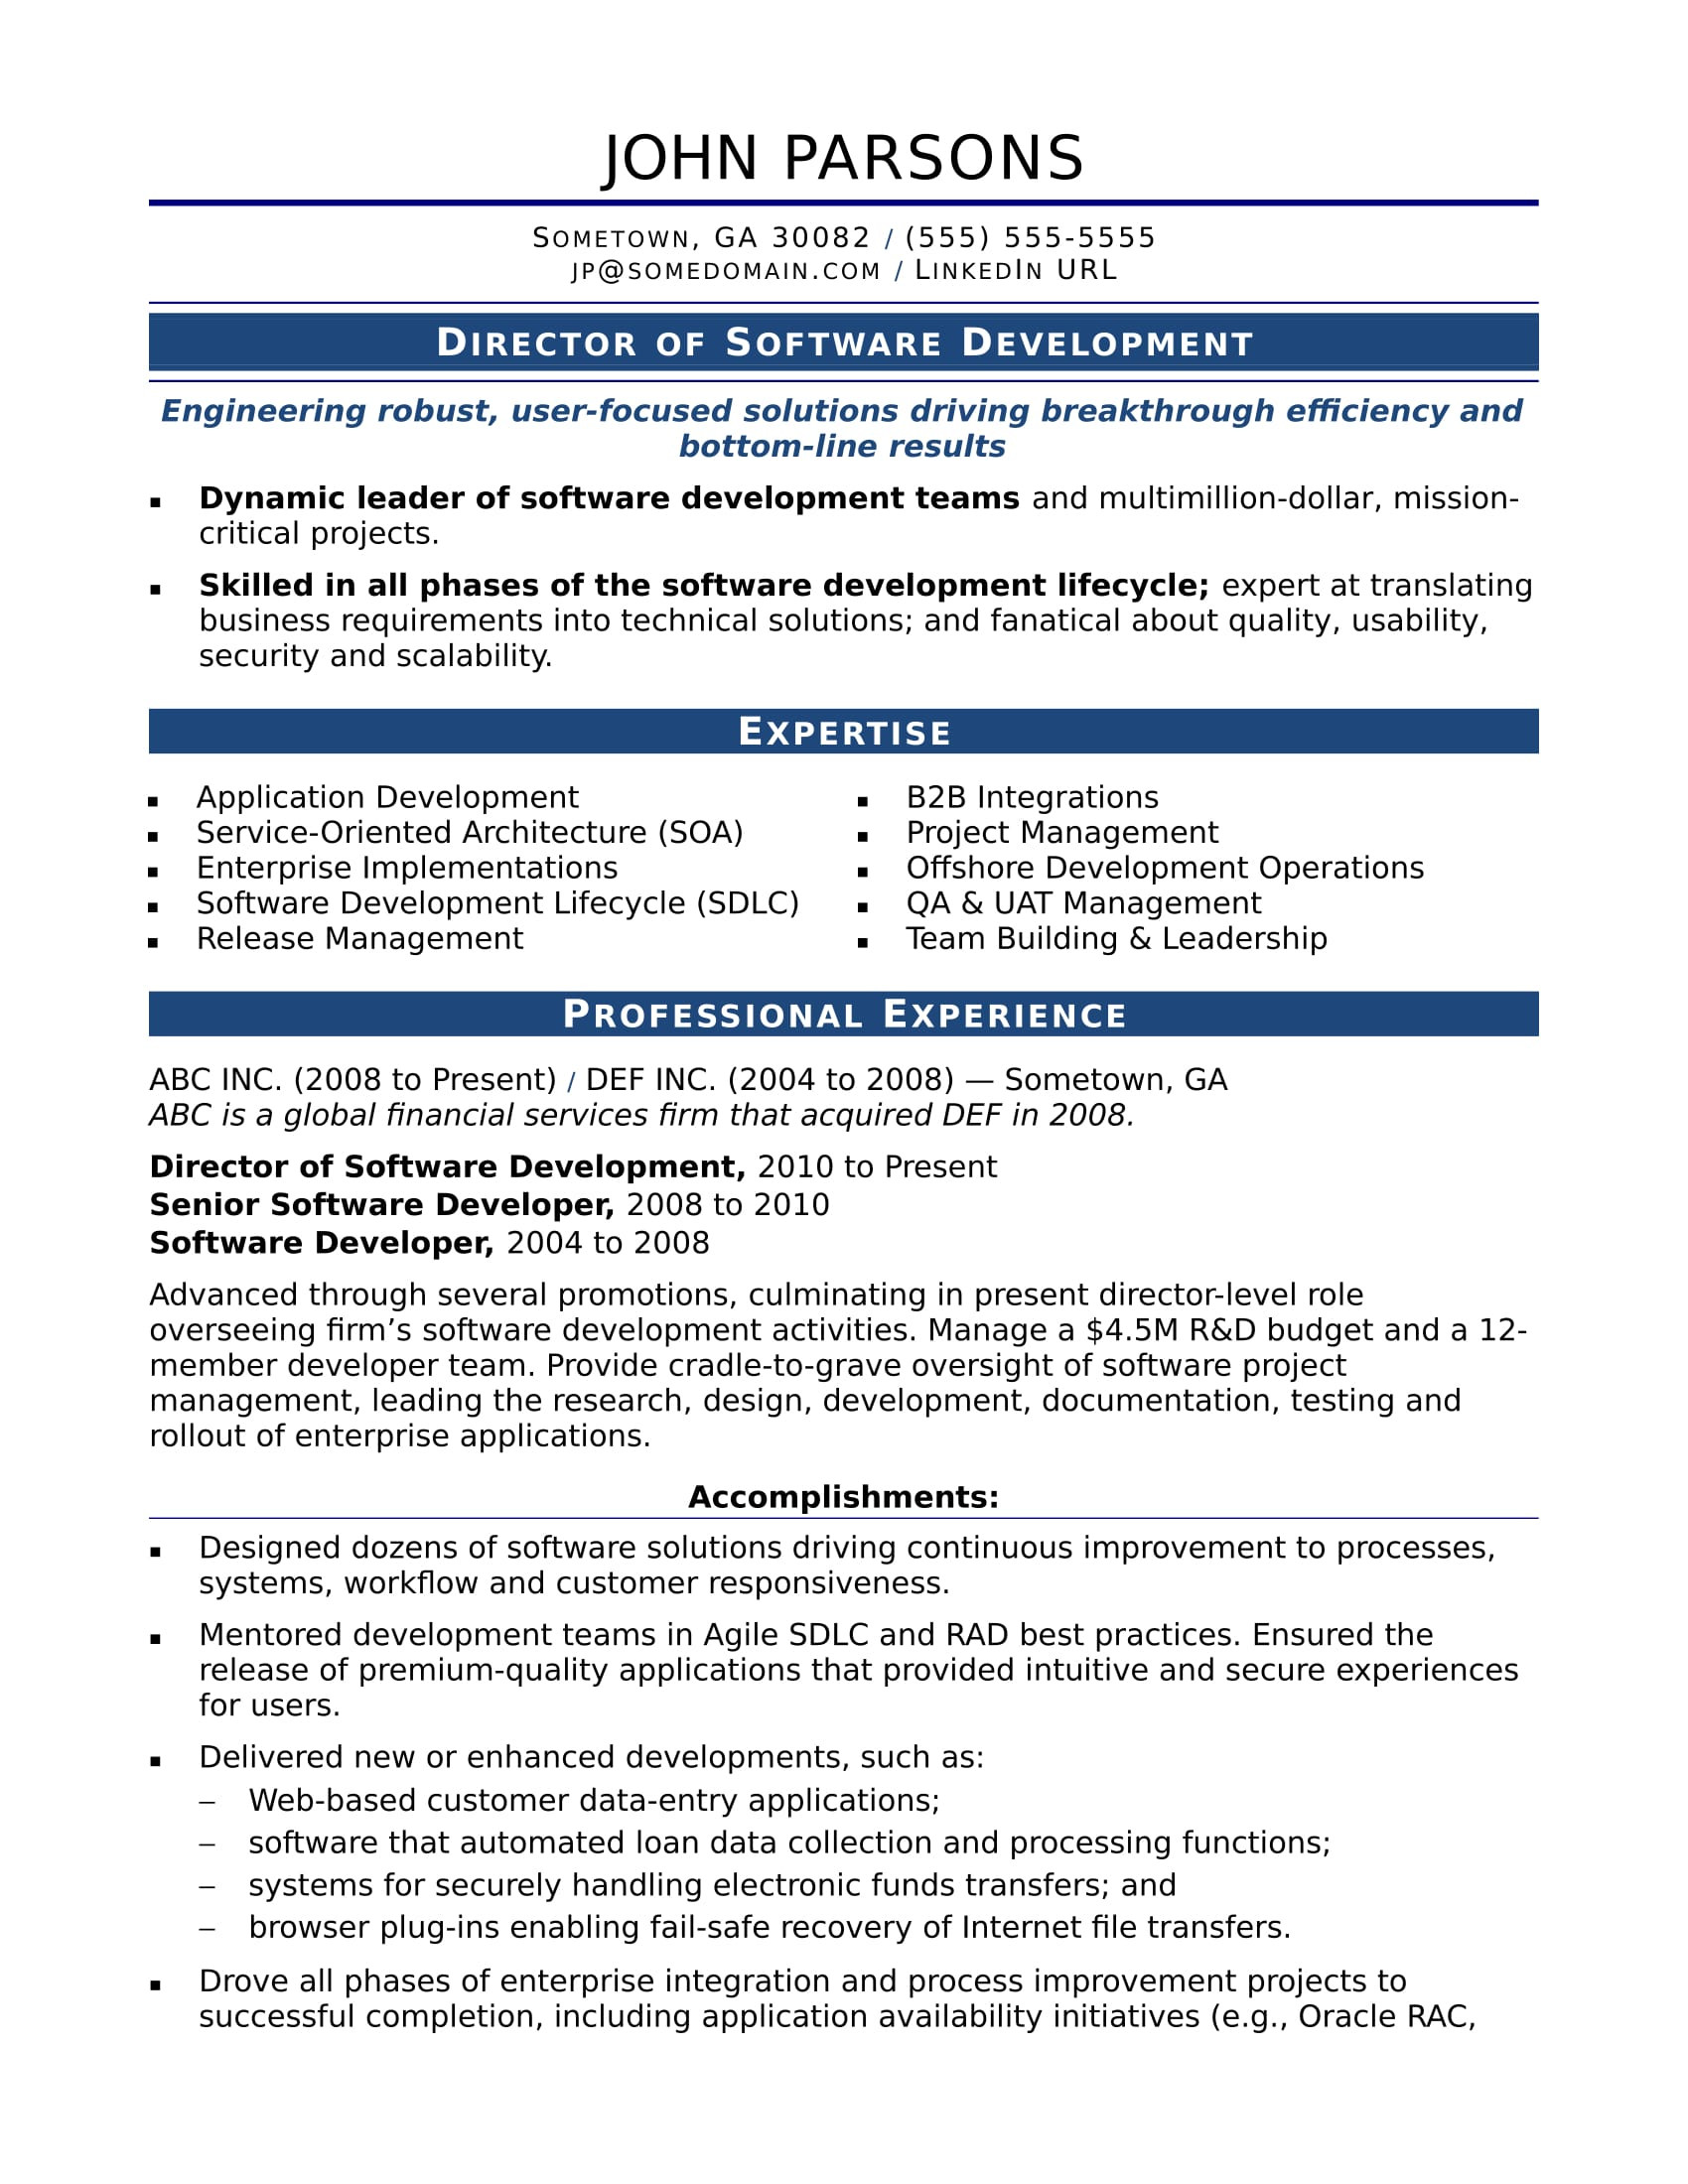 Free Sample Resume for Experienced It Professional Sample Resume for An Experienced It Developer